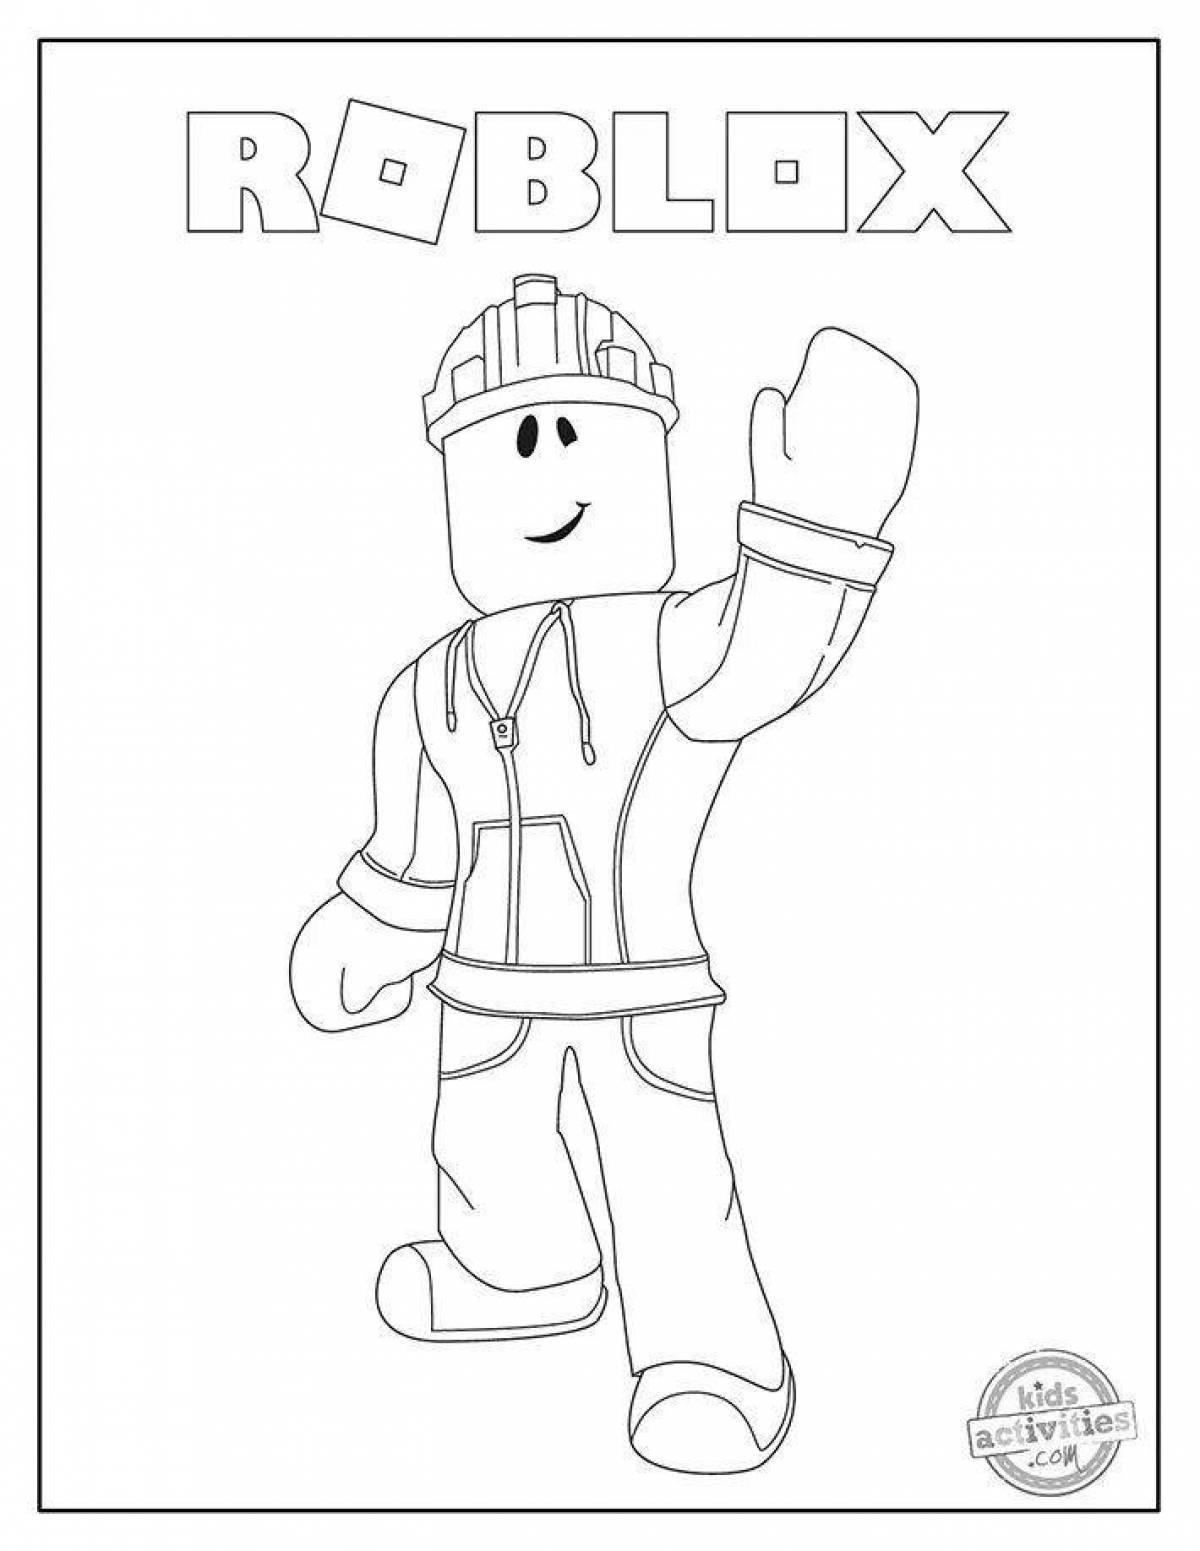 Color-explosion roblox player coloring page